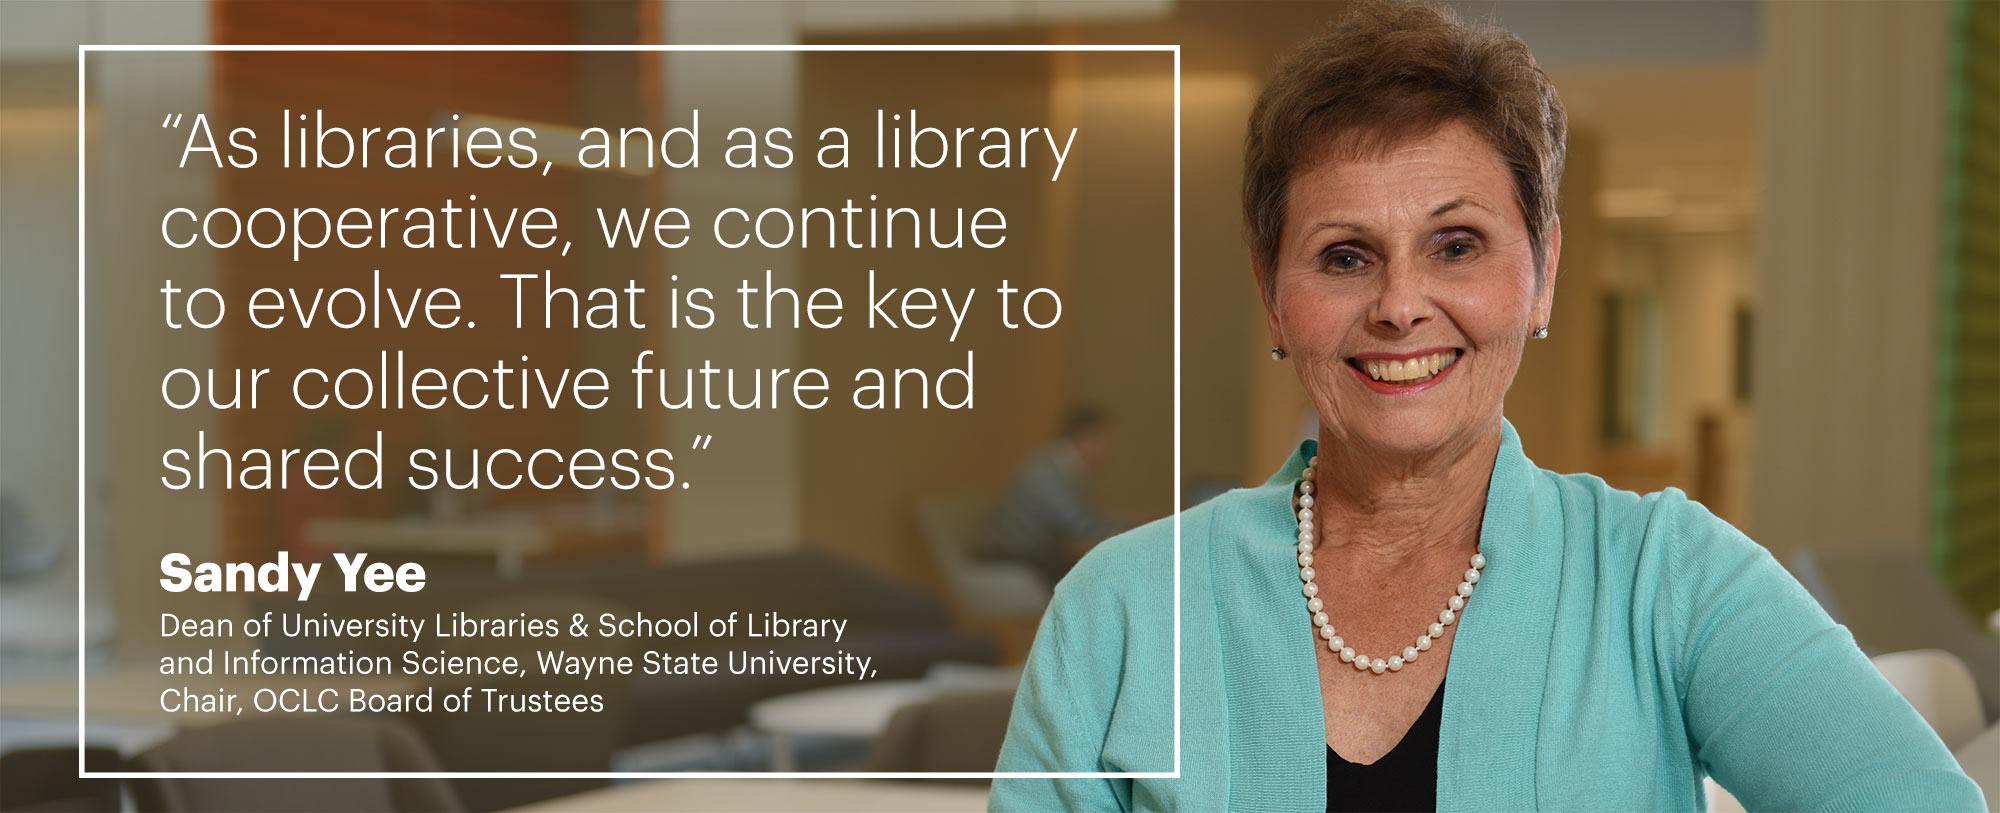 “As libraries, and as a library cooperative, we continue to evolve. That is the key to our collective future and shared success.“ –Sandy Yee, Dean of University Libraries & School of Library and Information Science, Wayne State University, Chair, OCLC Board of Trustees